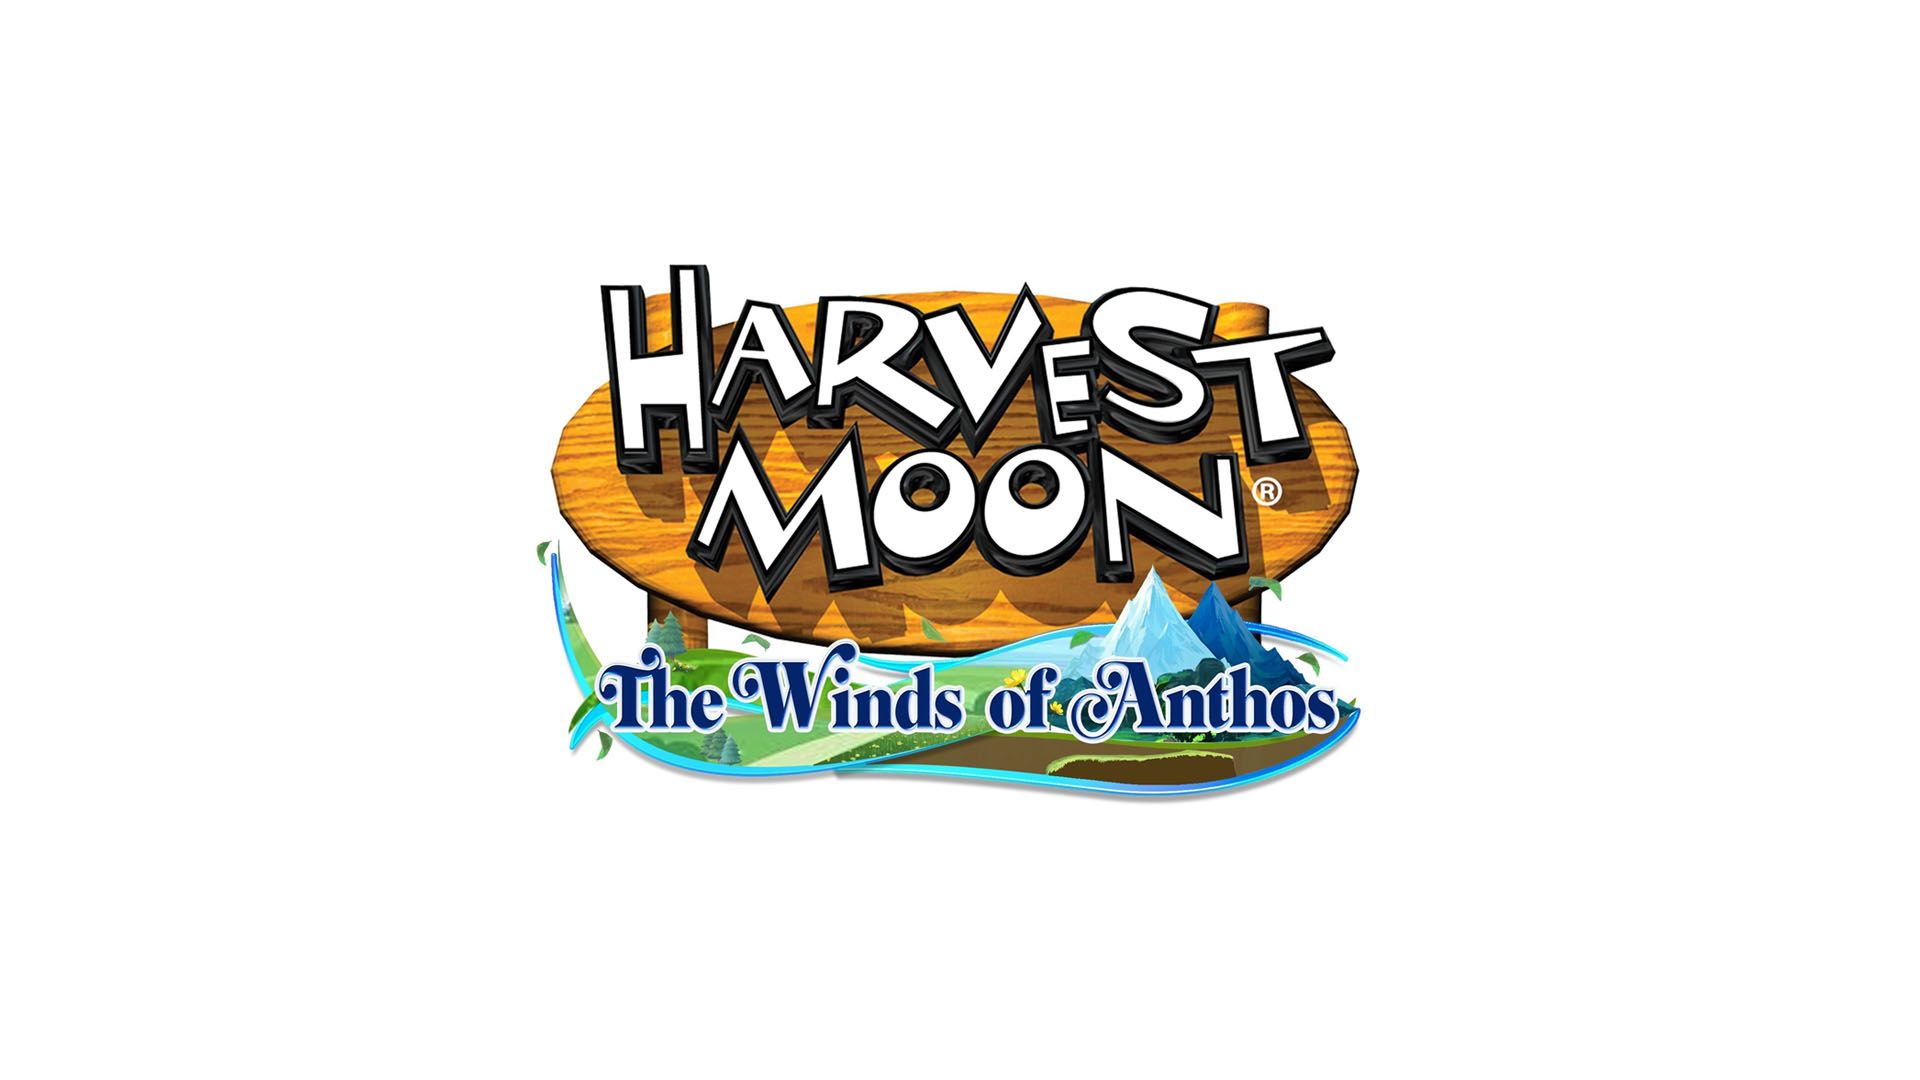 Harvest Moon: The Winds of Anthos announced